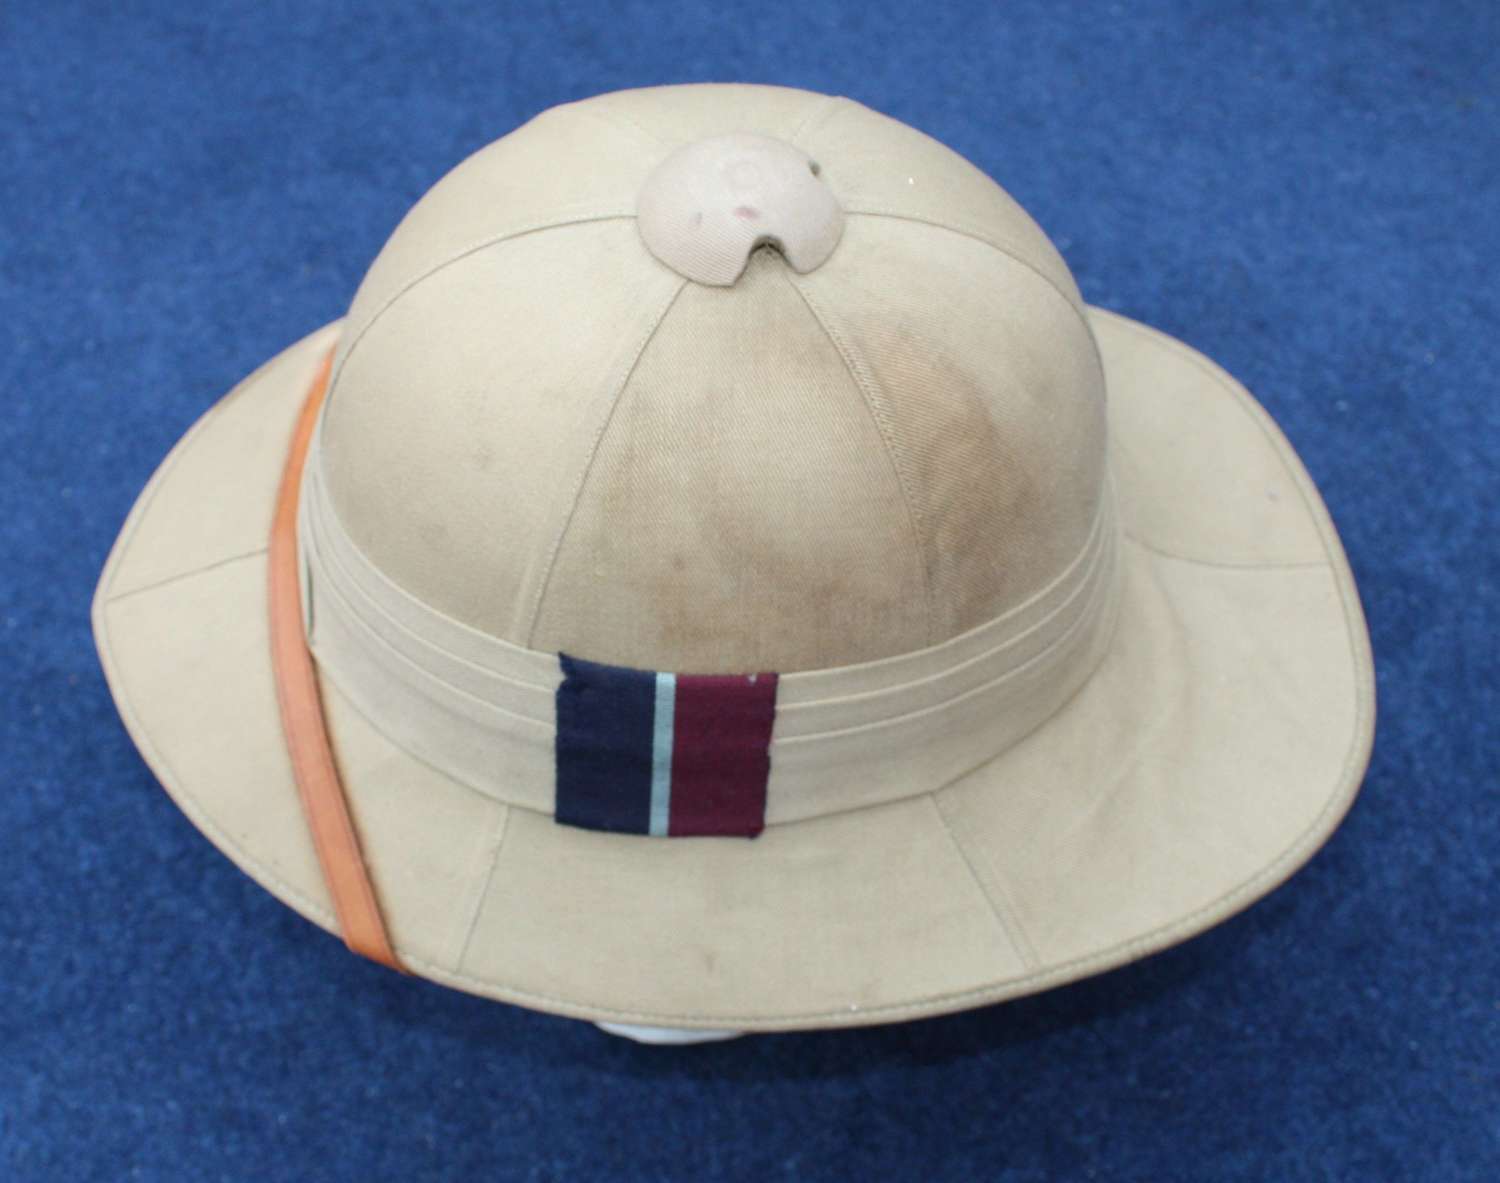 1942 dated RAF Pith Helmet & Bag. All in Very Good Condition.